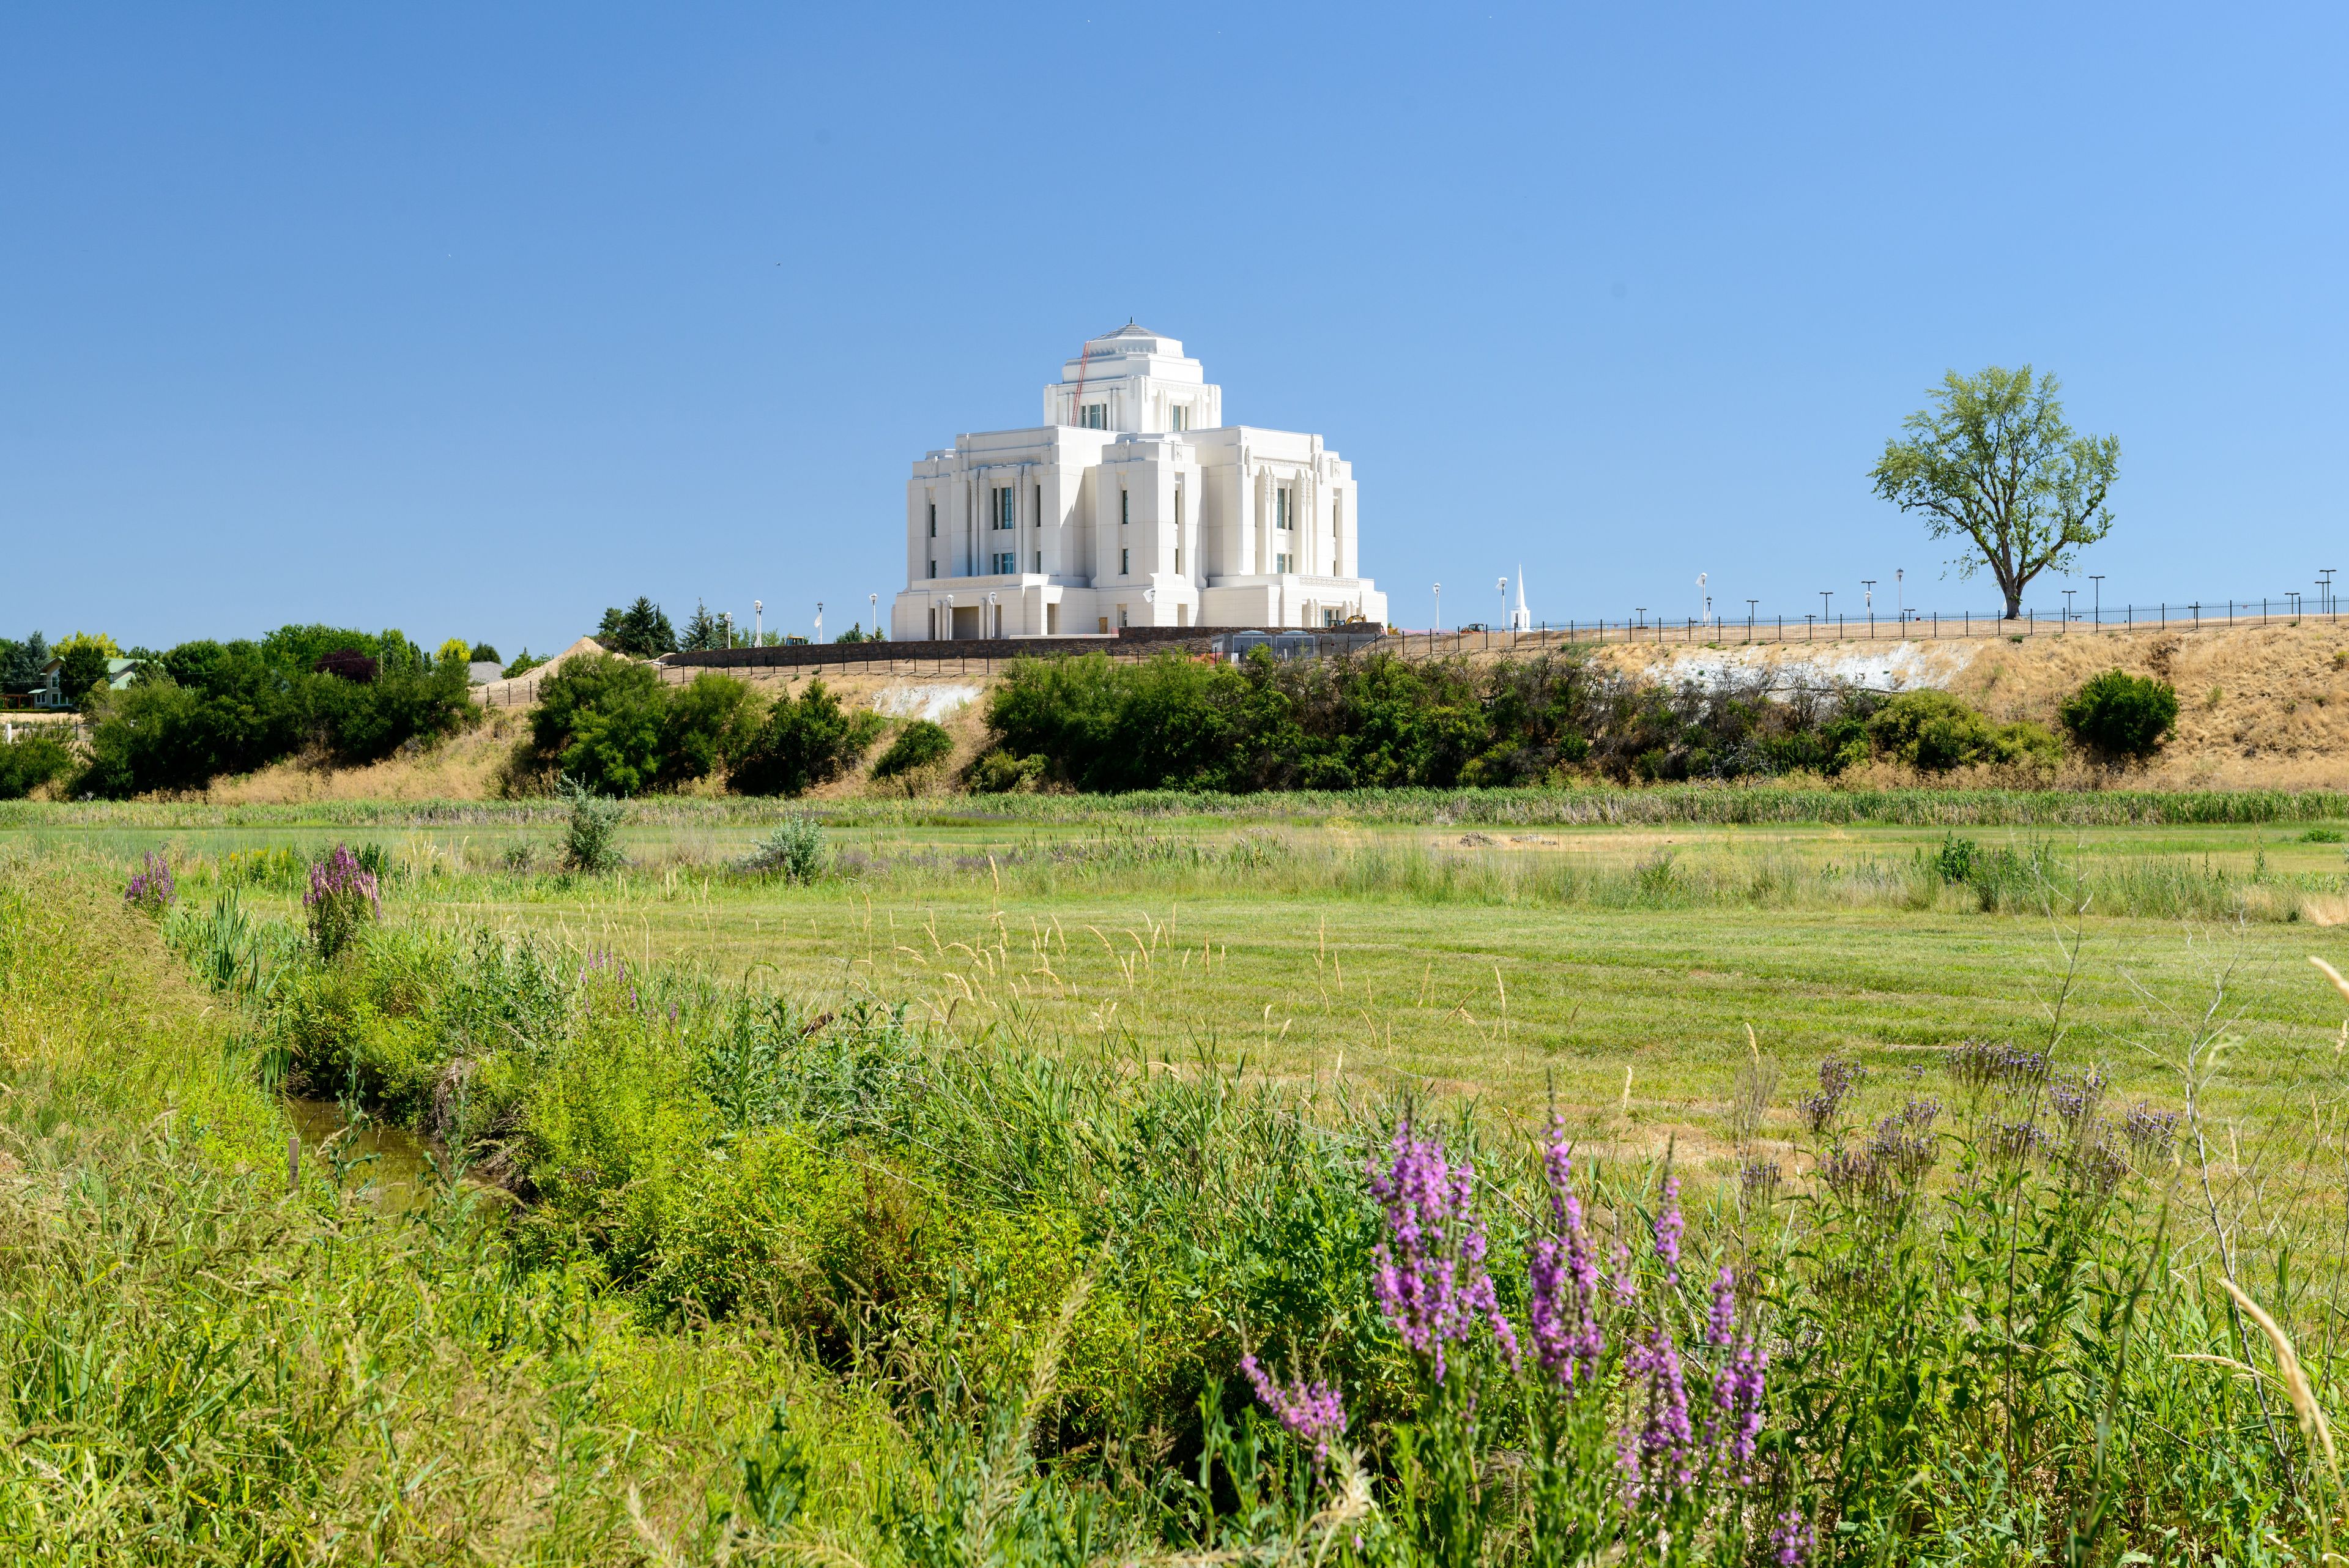 A view of the Meridian Idaho Temple from across a green field.